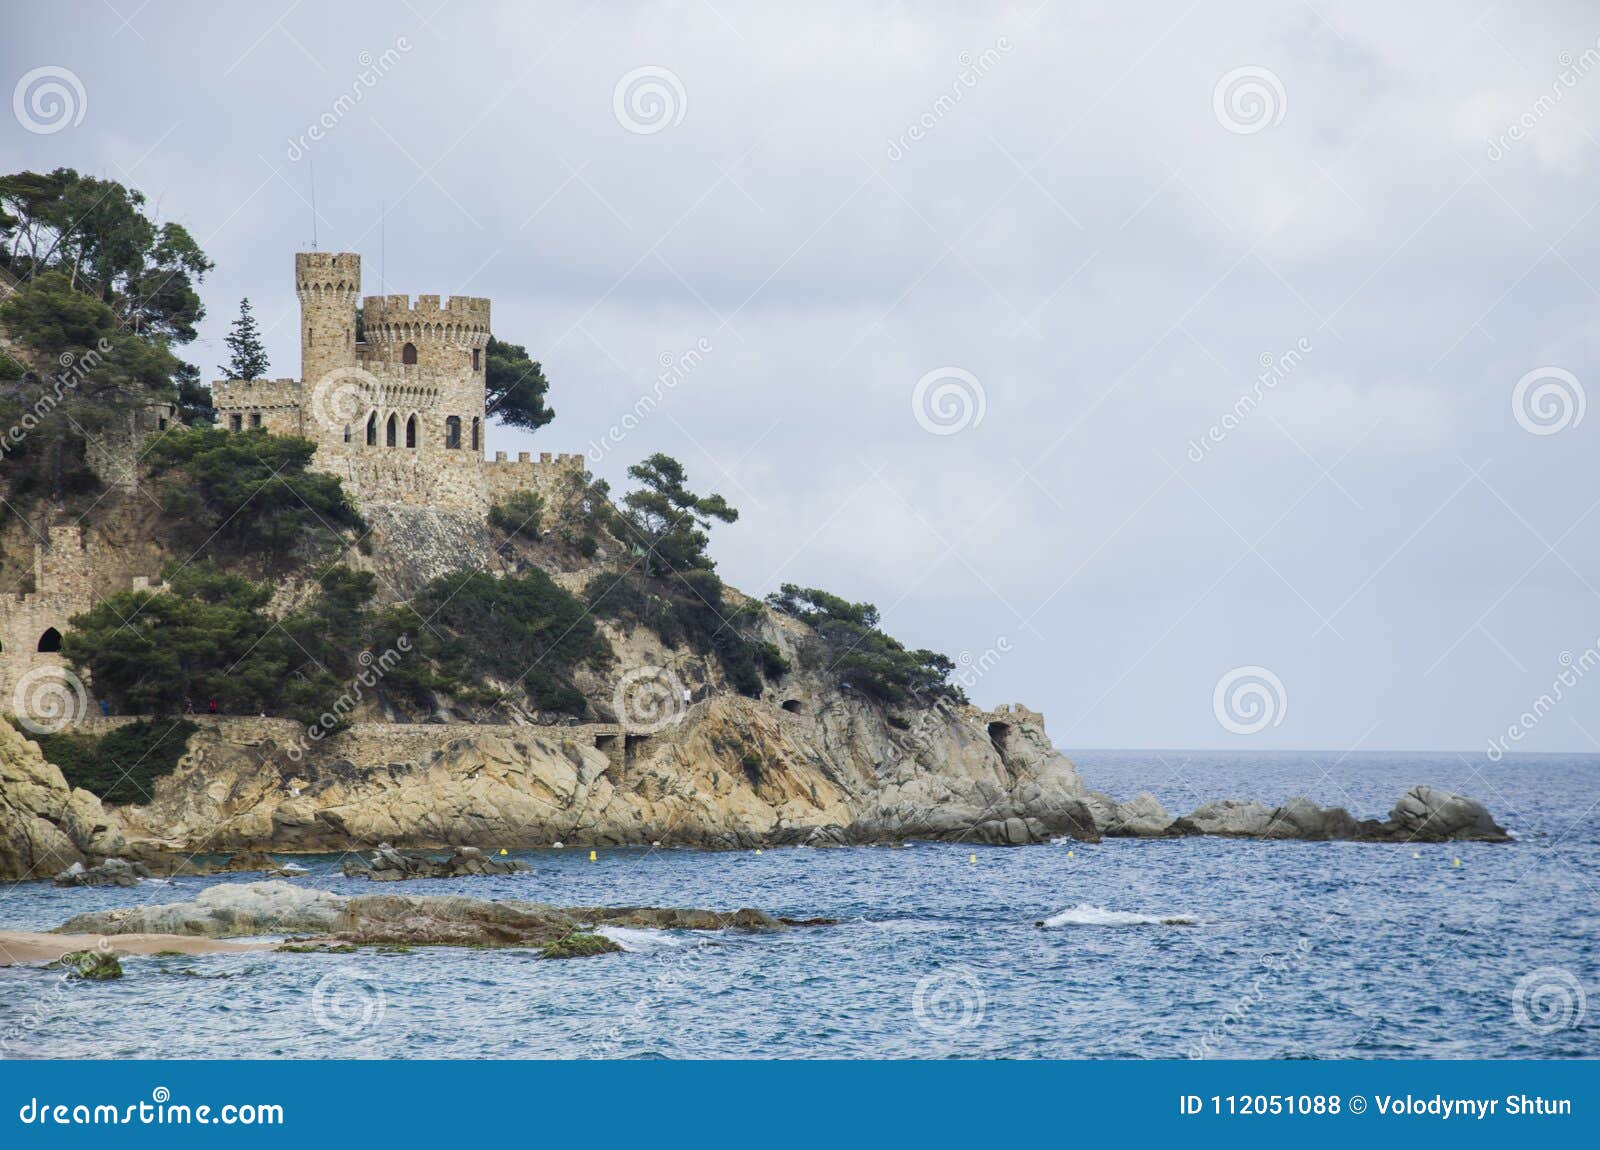 panoramic view of lloret de mar castle at sunset, costa brava between barcelona and girona, spain. ancient fortress in